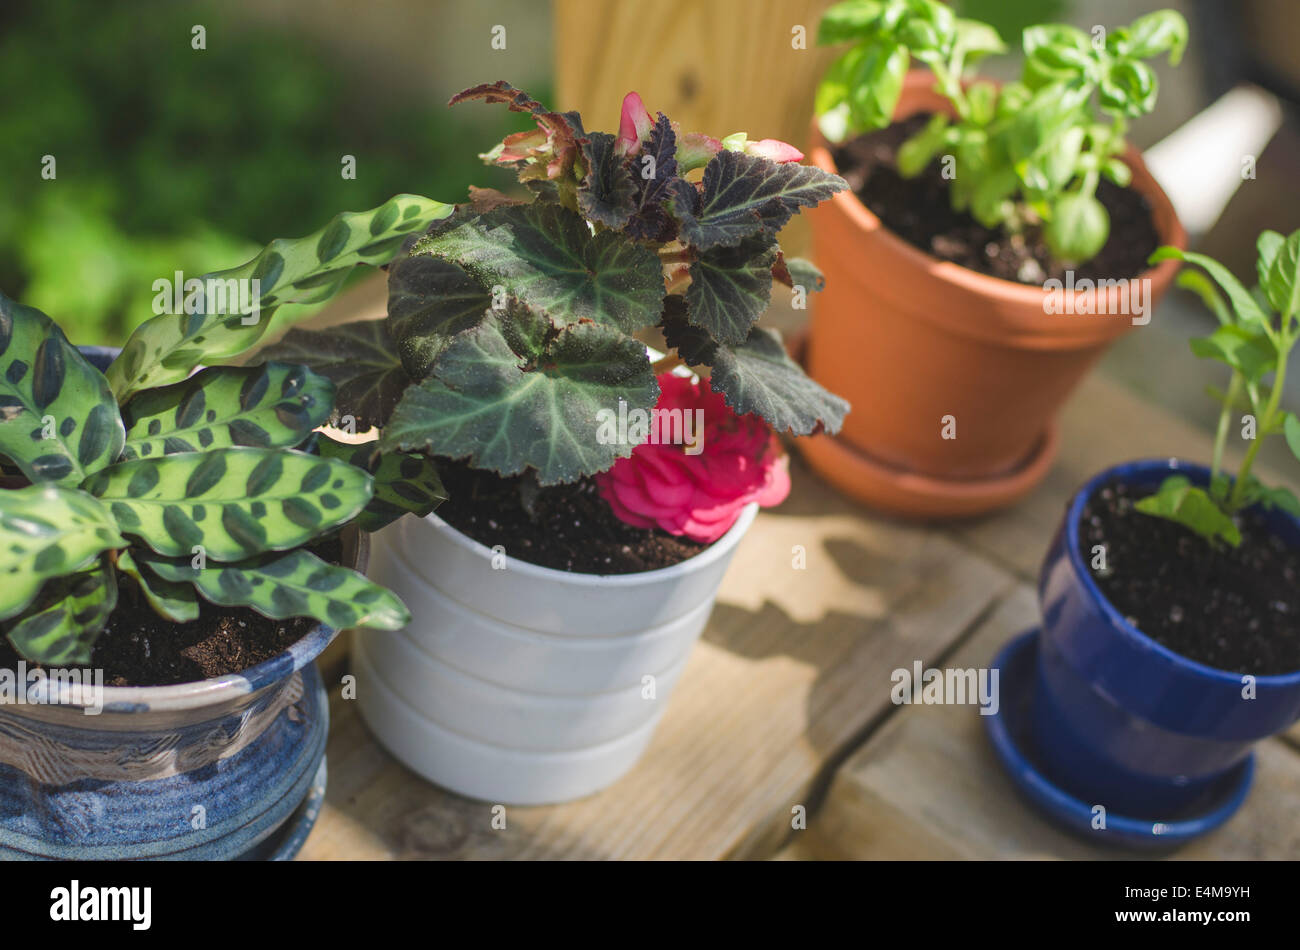 Four Small Potted Plants on Wood Bench Outdoors Stock Photo